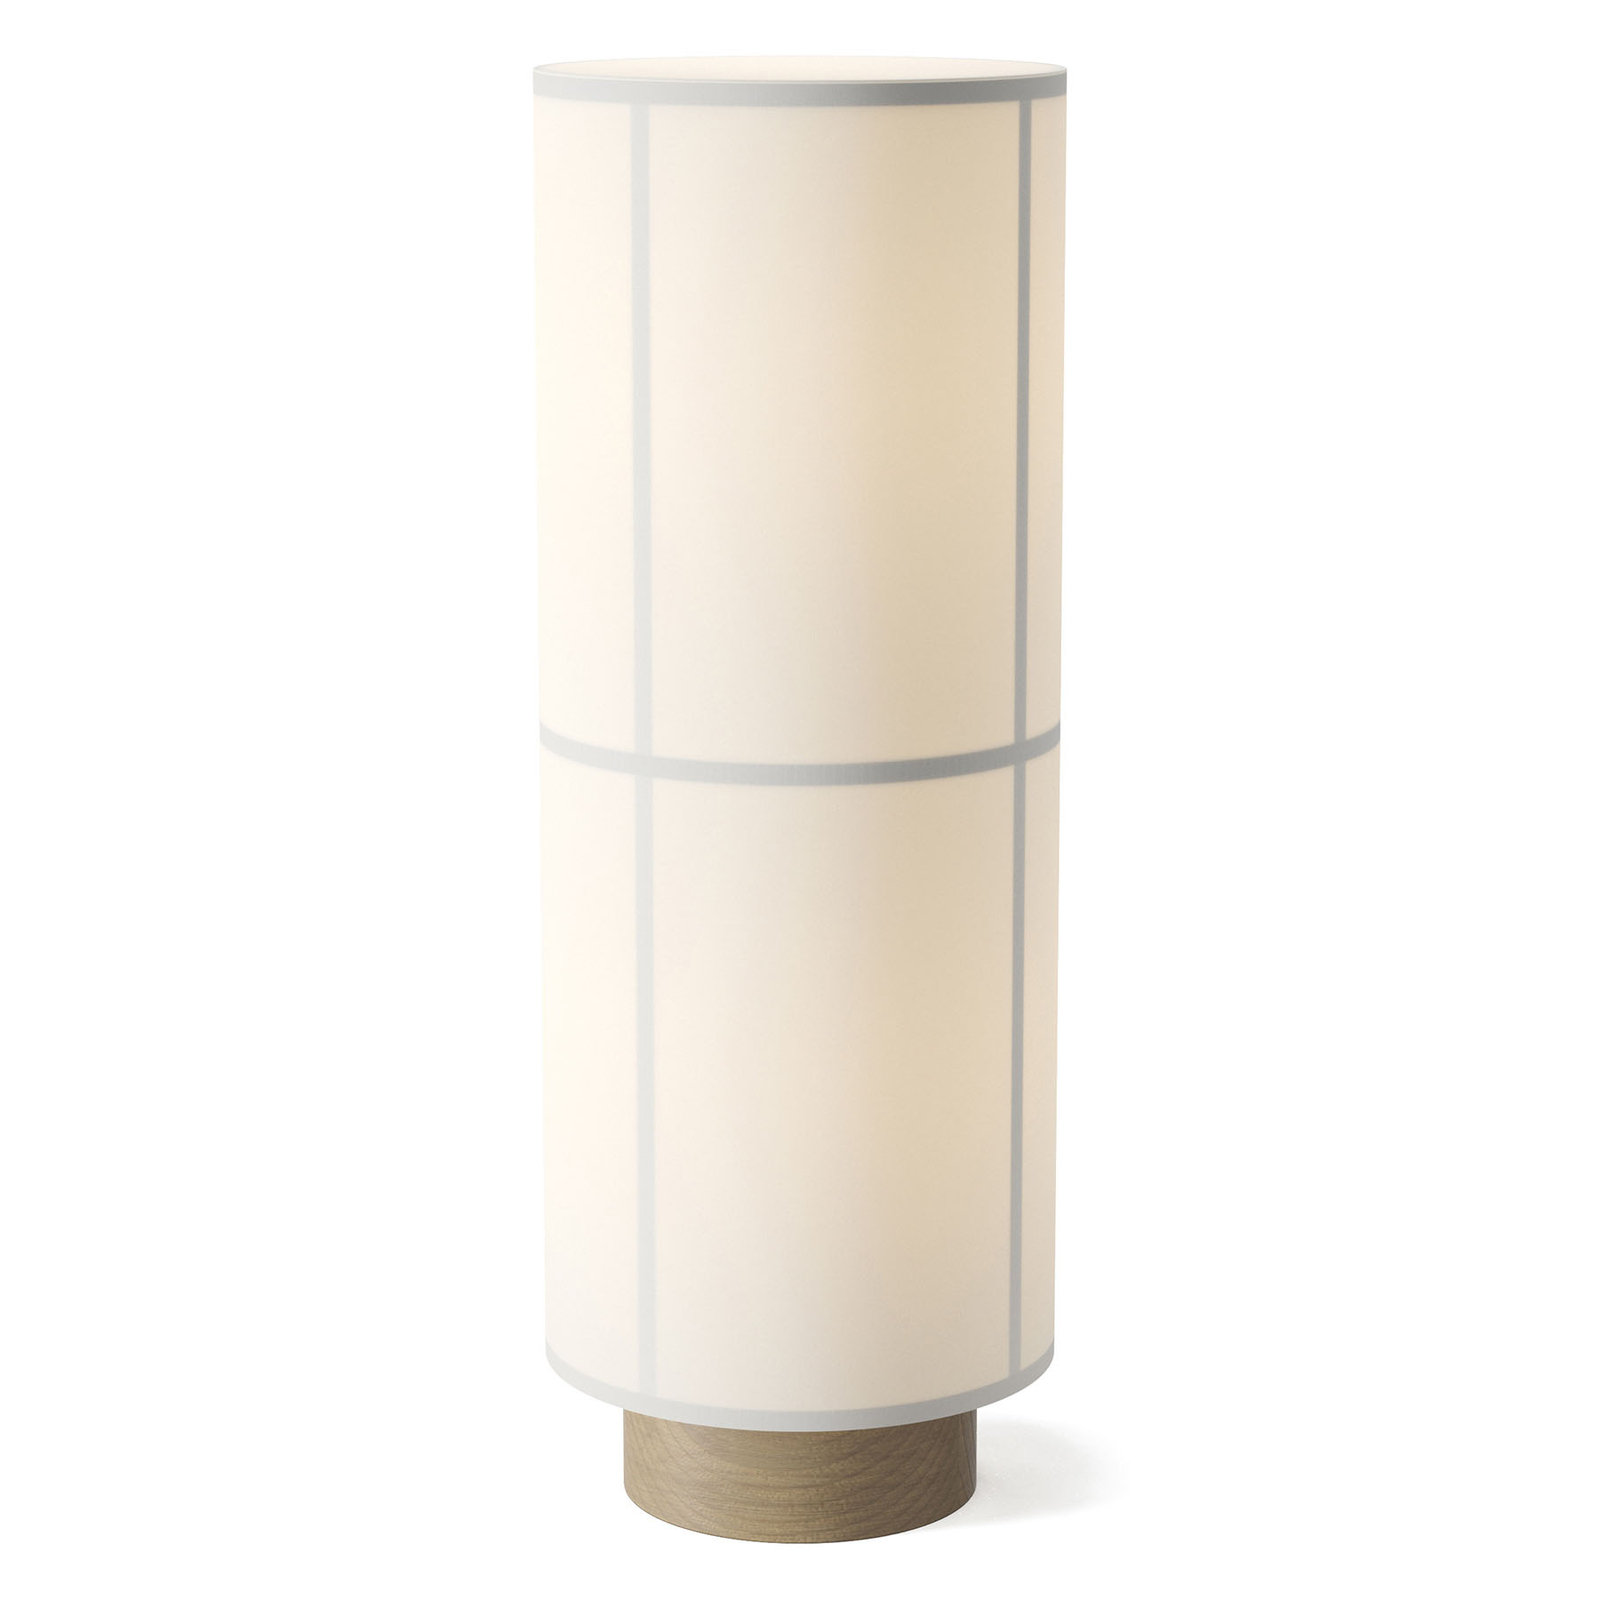 Audo Hashira floor lamp with a dimmer, white